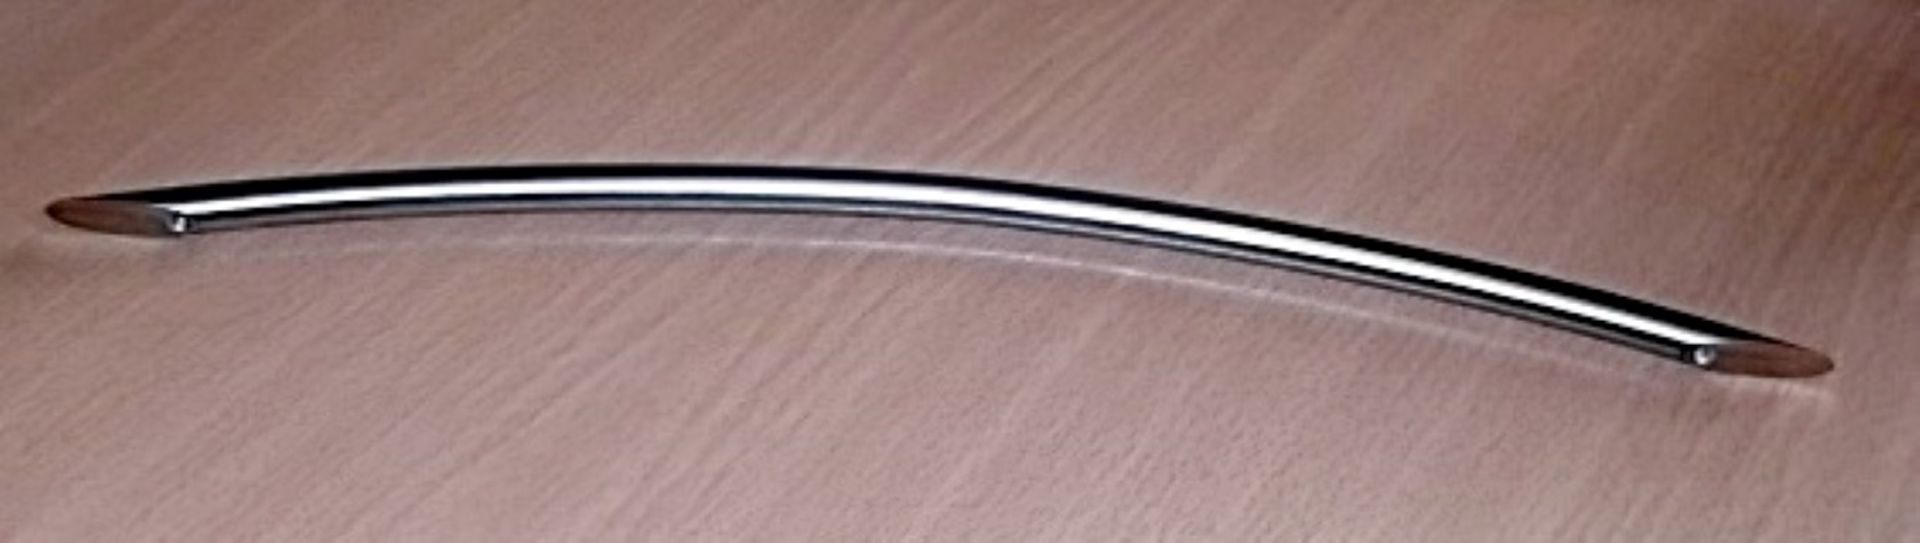 400 x BOW Handle Kitchen Door Handles By Crestwood - 320mm - New Stock - Brushed Nickel Finish - - Image 8 of 10